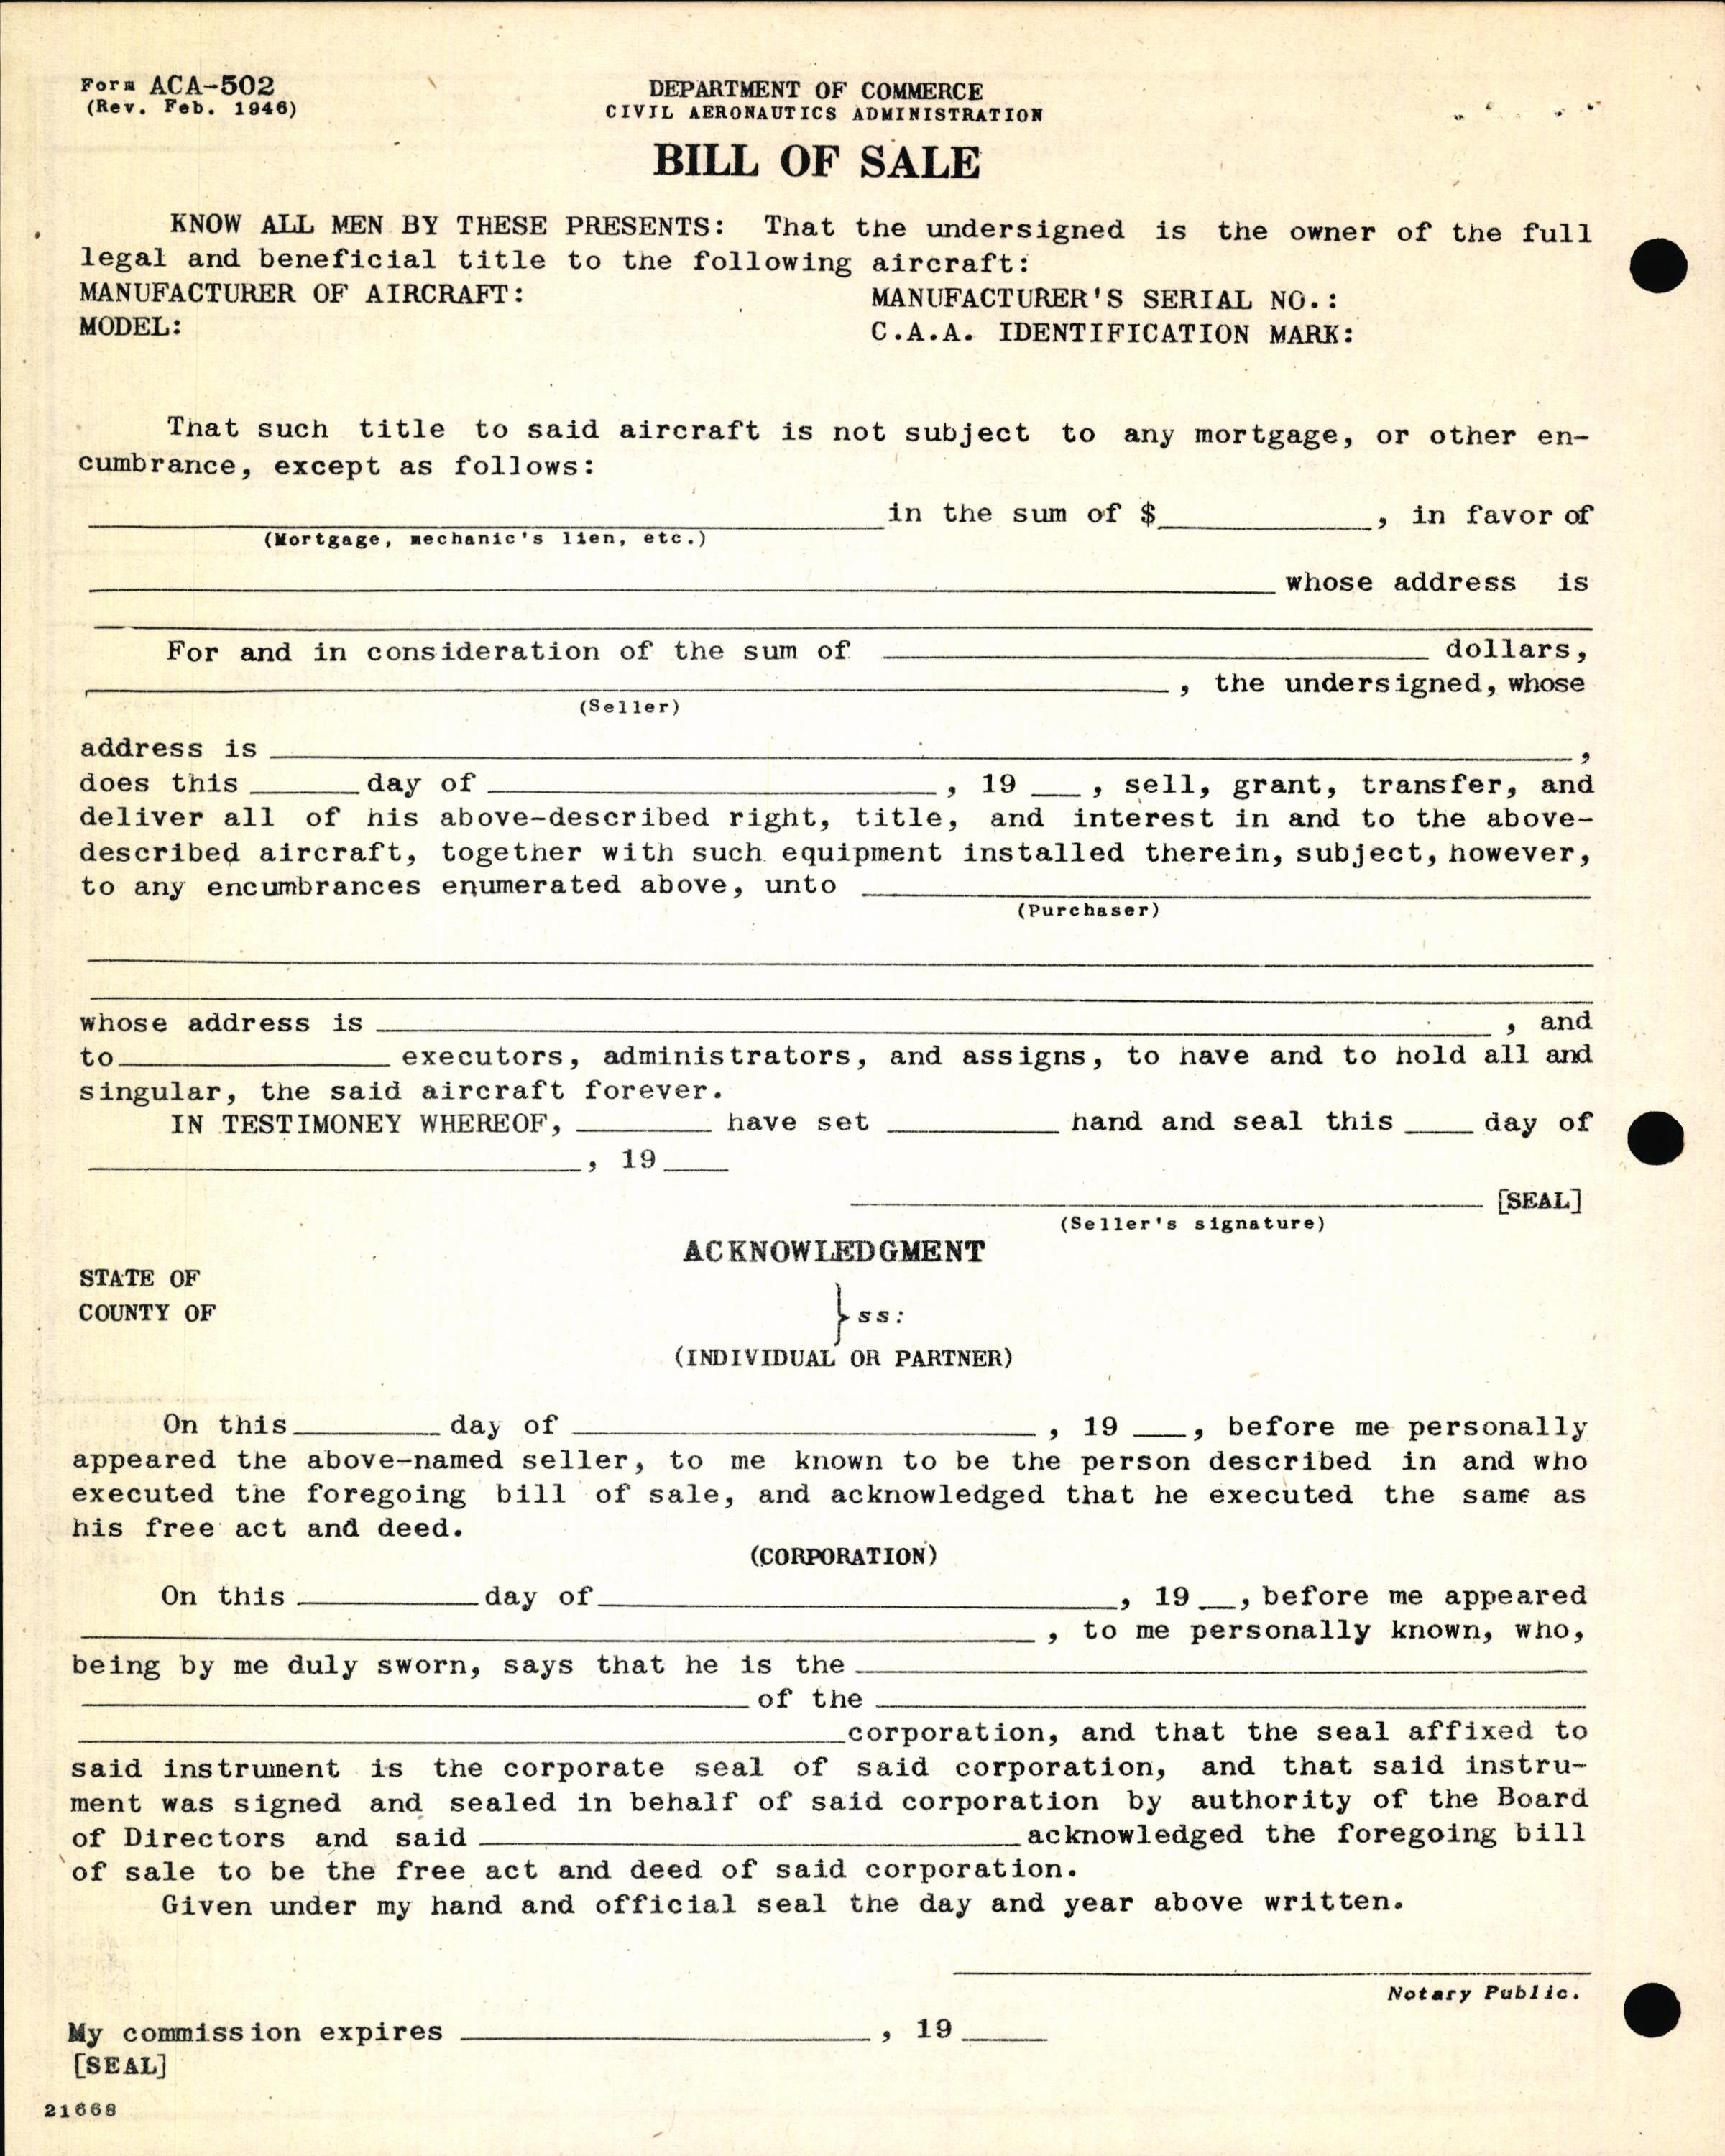 Sample page 6 from AirCorps Library document: Technical Information for Serial Number 1251